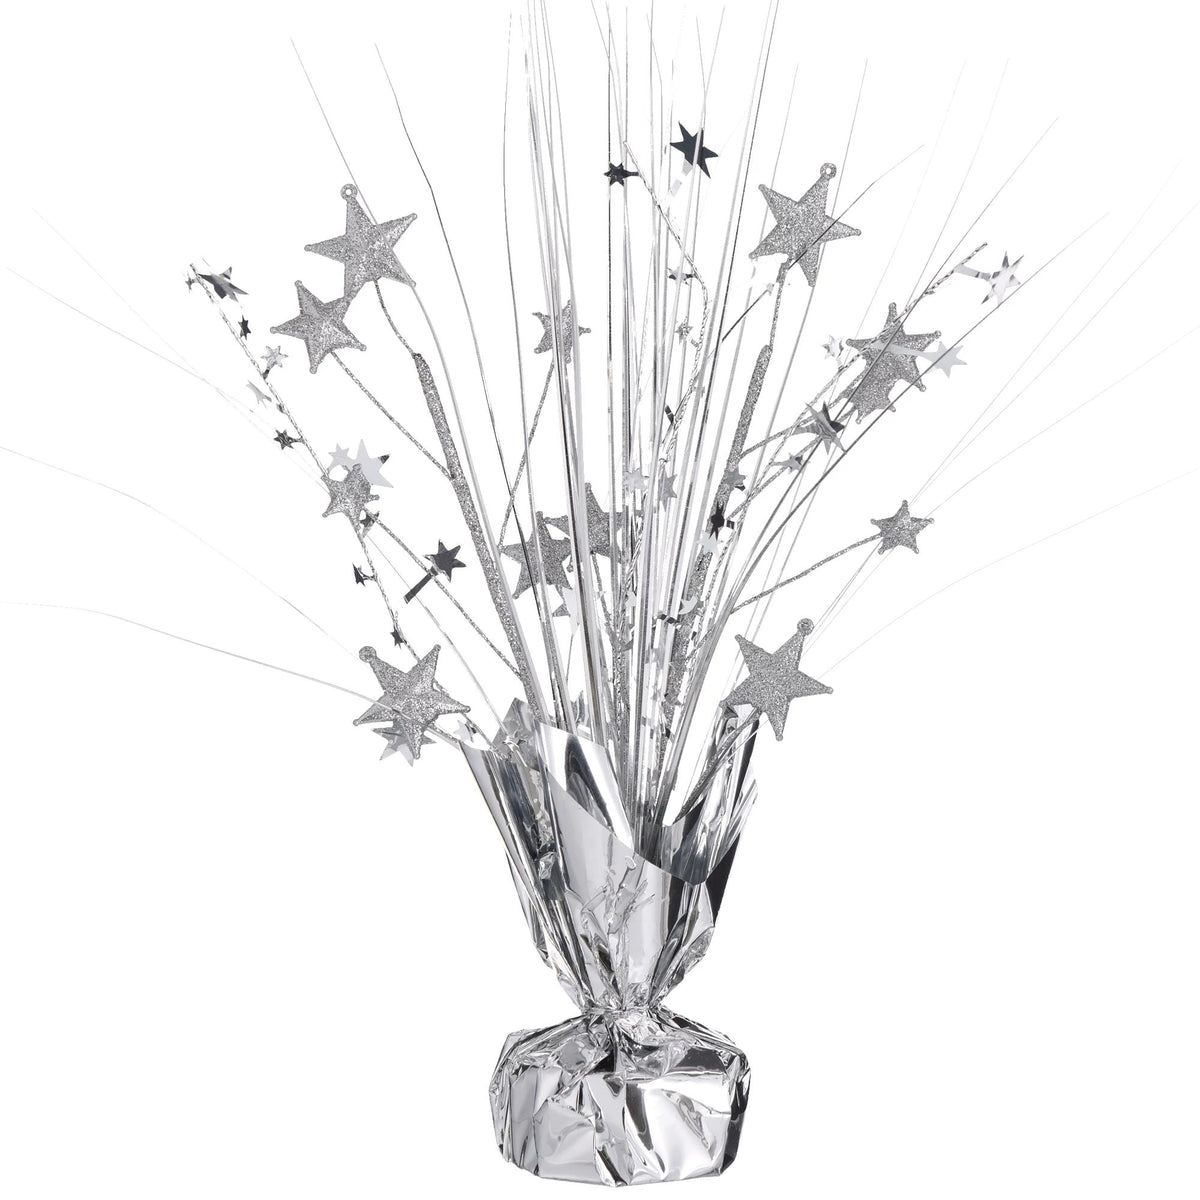 AMSCAN CA Decorations Spray Centerpiece with Stars, Silver, 12 Inches, 1 Count 192937416358